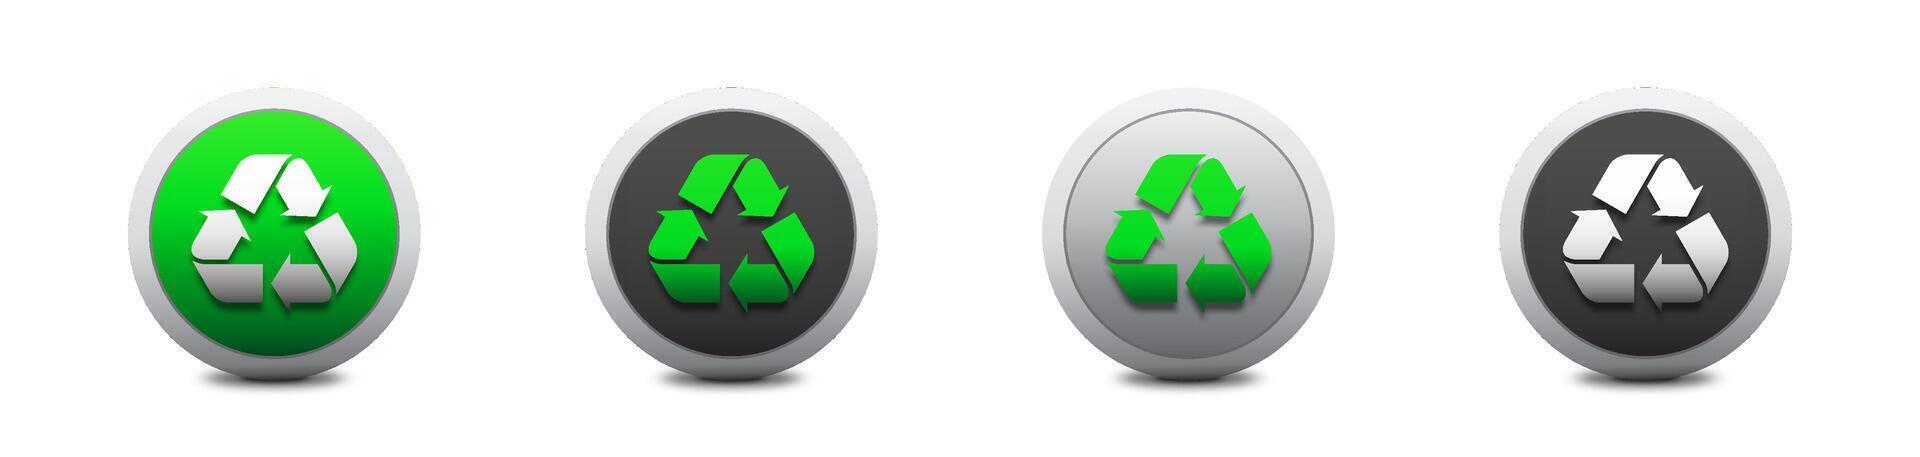 Recycle symbol on a round button with shadow. 3d recycling symbol set. Flat vector illustration.